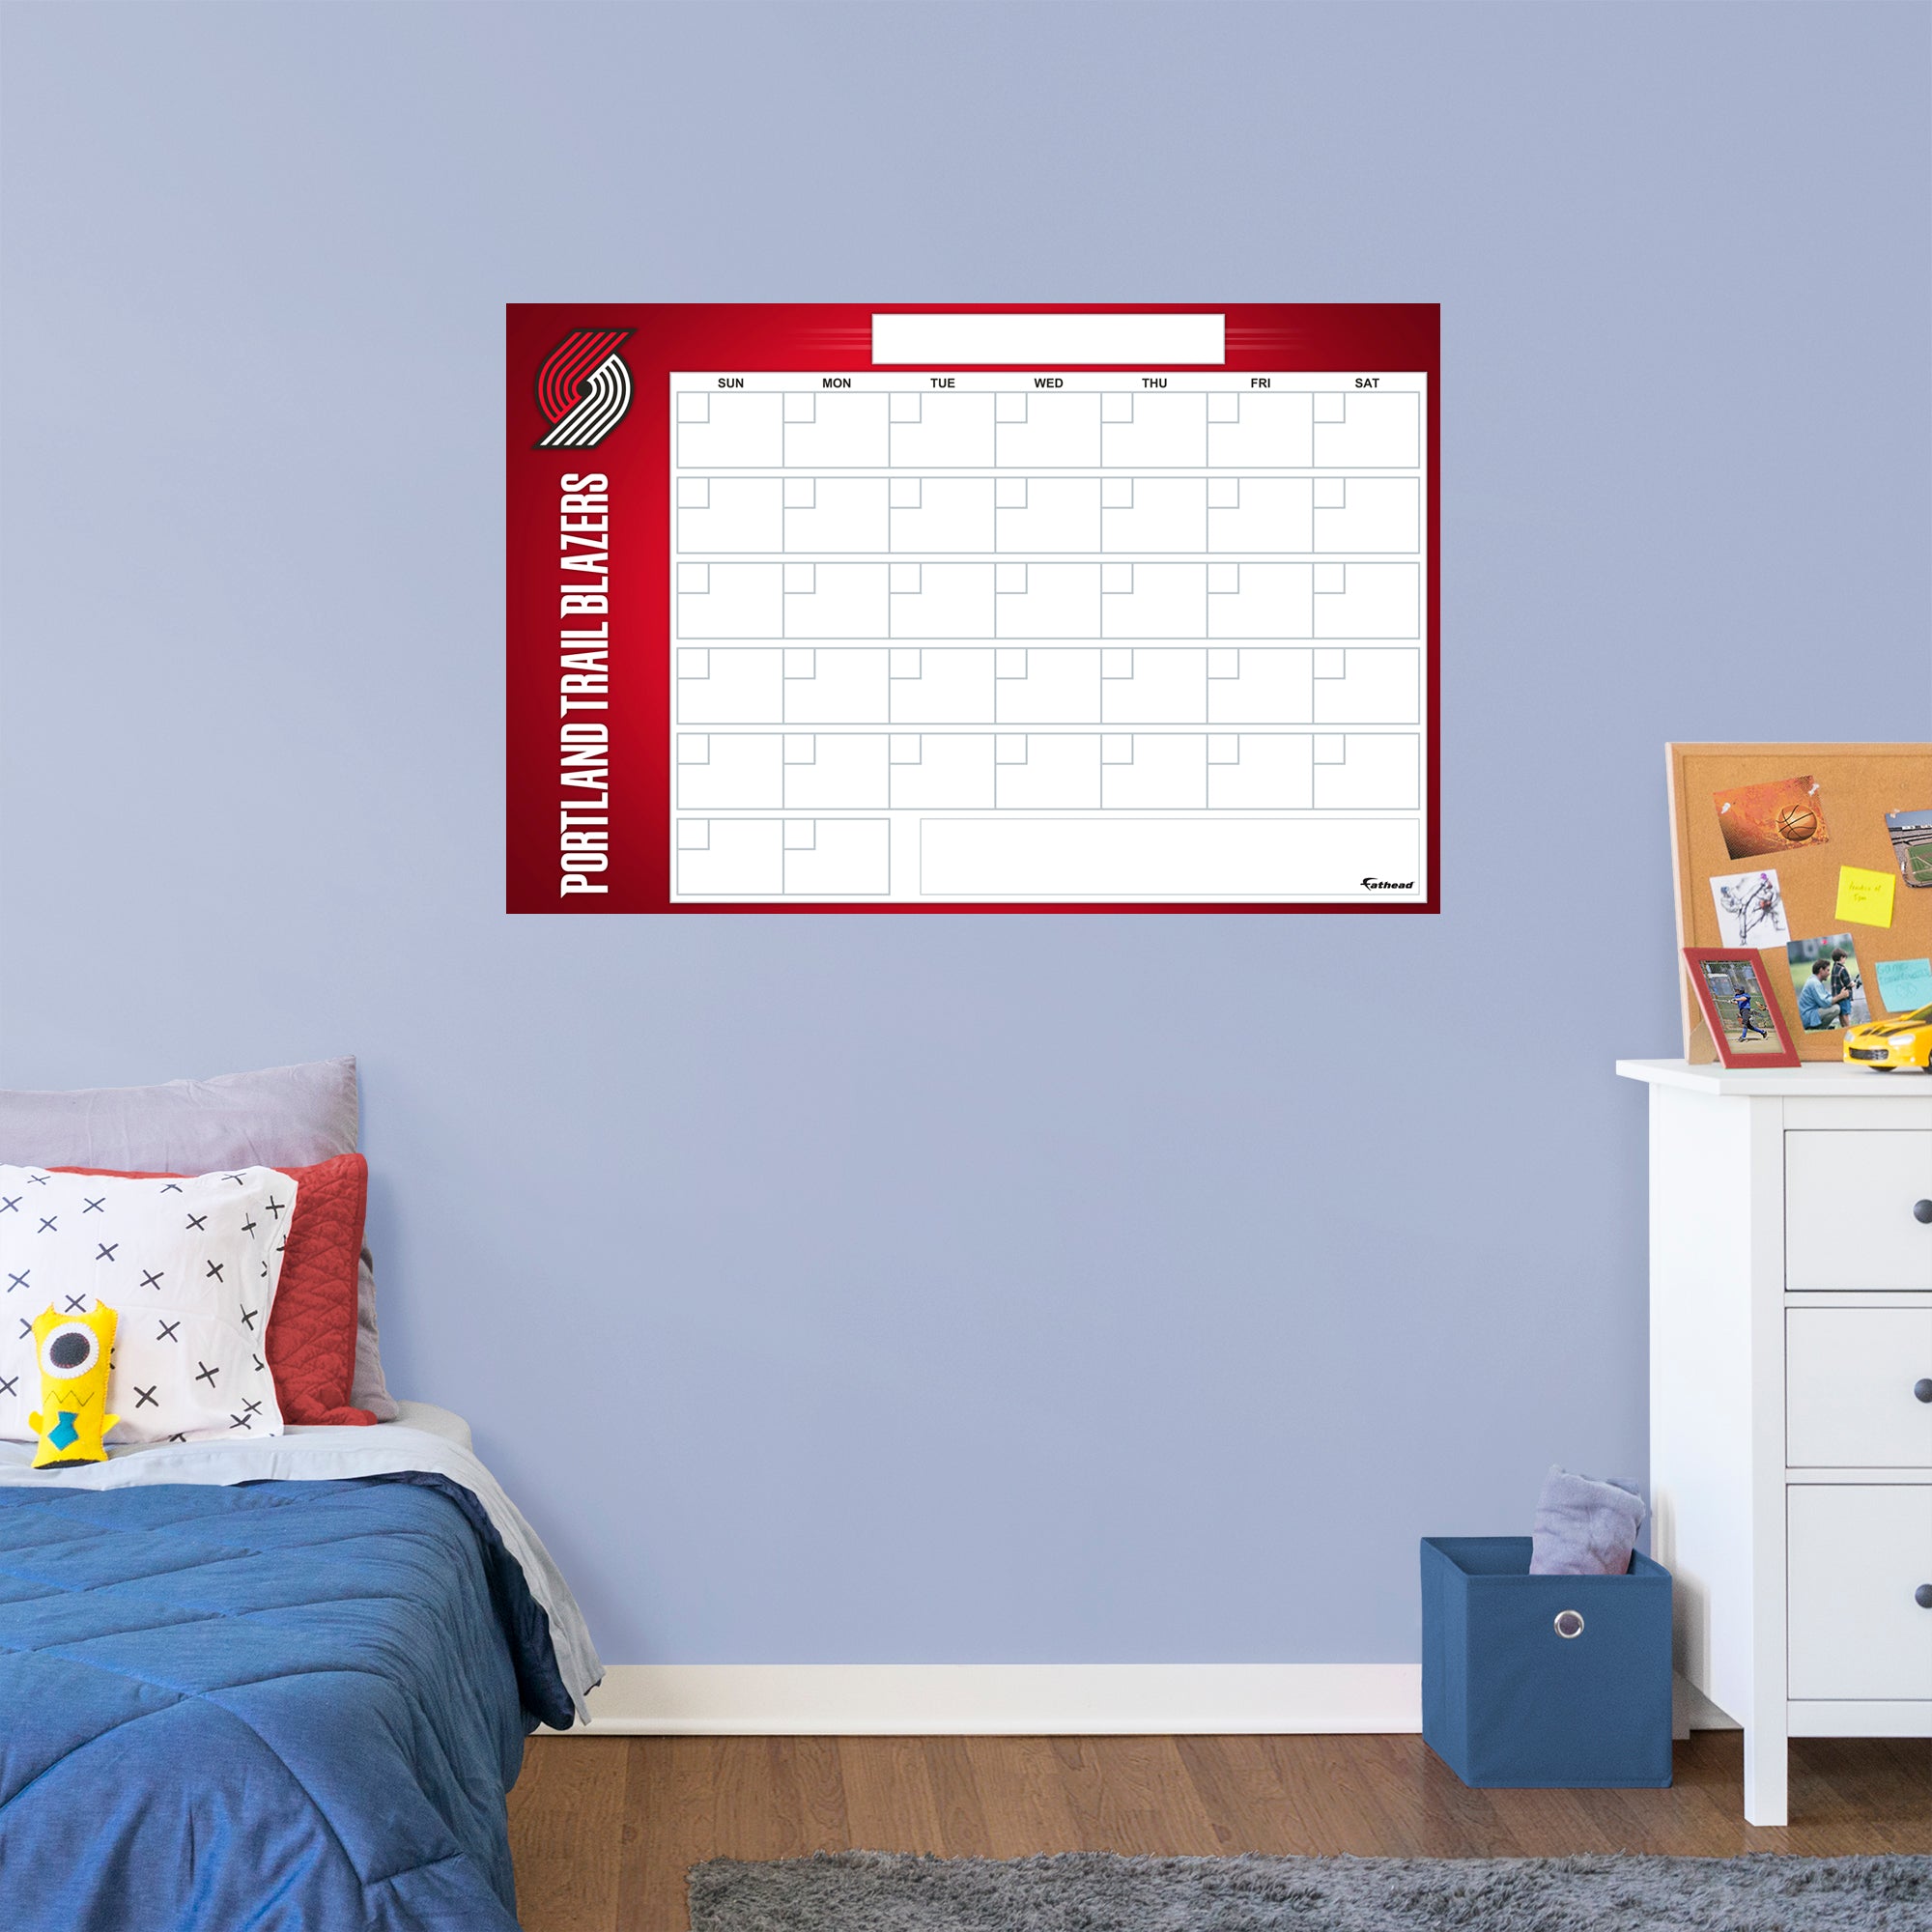 Portland Trail Blazers Dry Erase Calendar - Officially Licensed NBA Removable Wall Decal Giant Decal (34"W x 52"H) by Fathead |